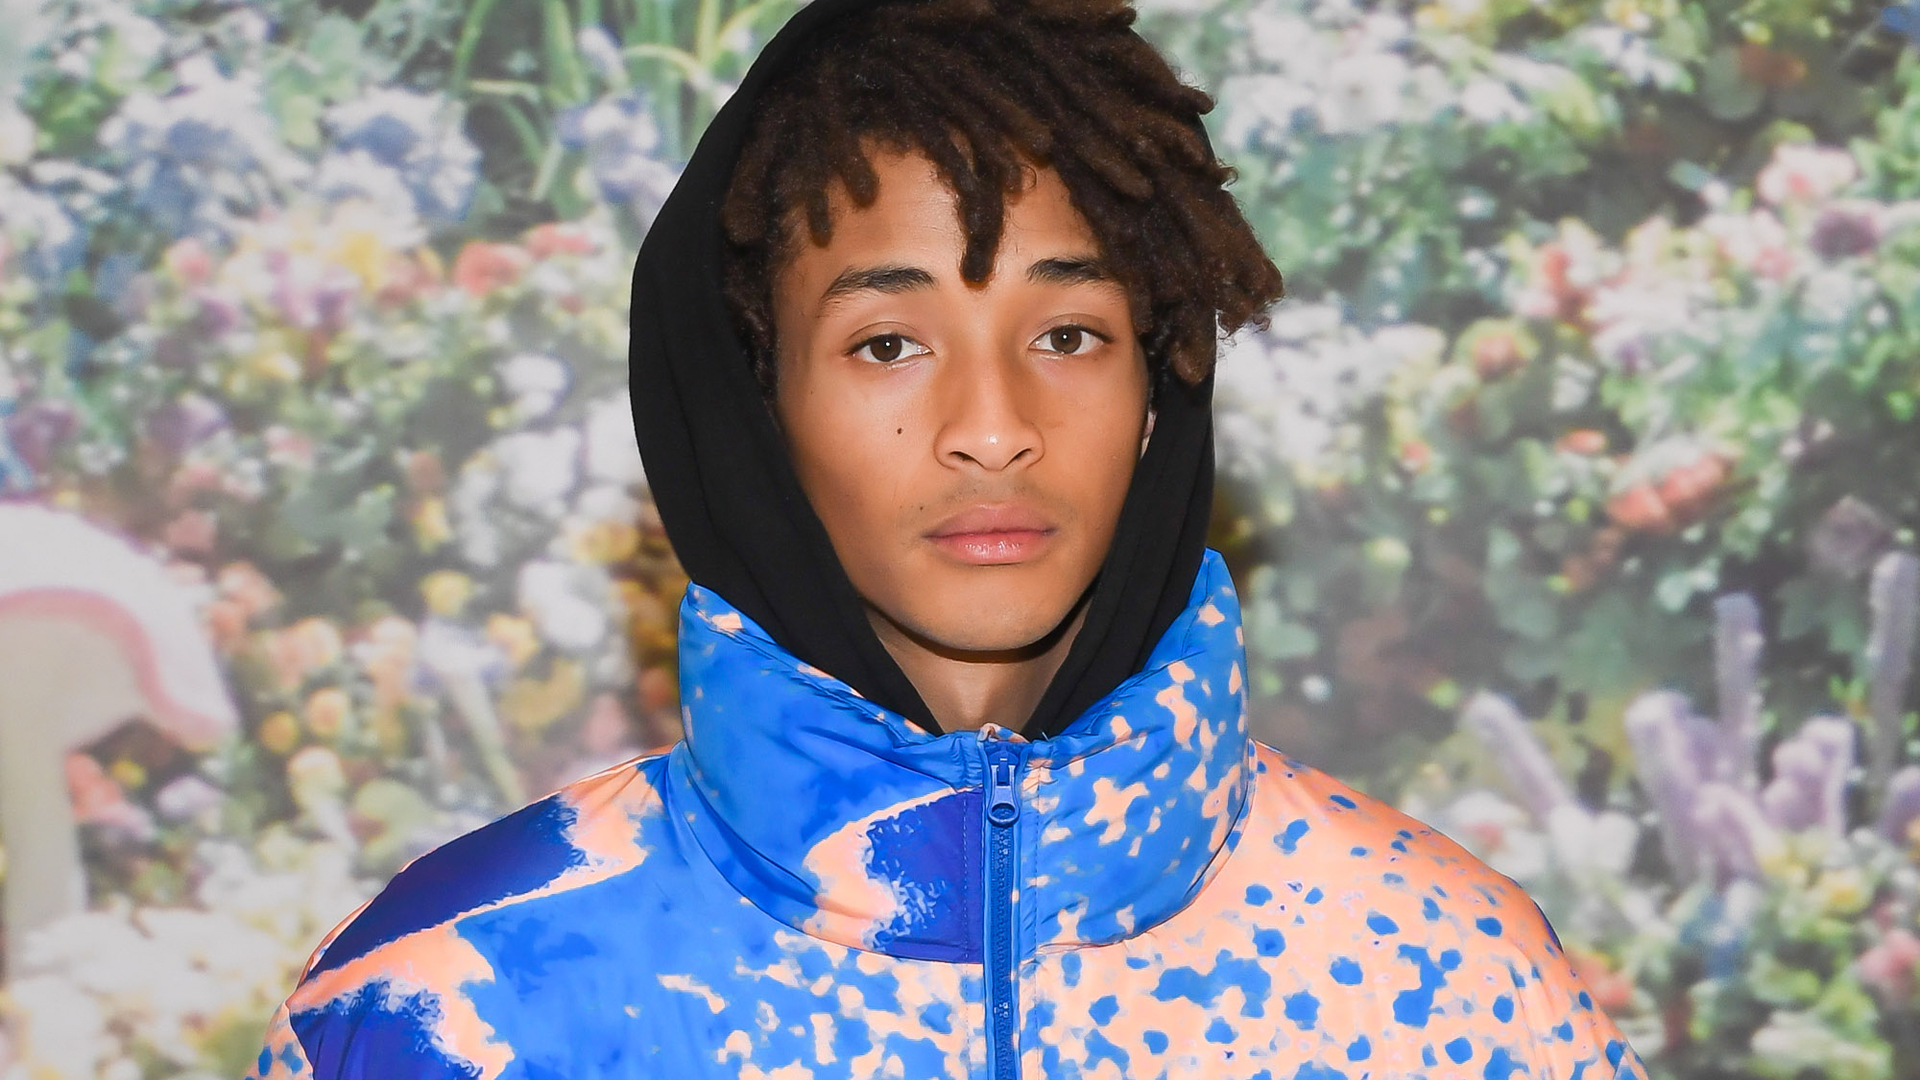 Jaden Smith is learning to expand his consciousness